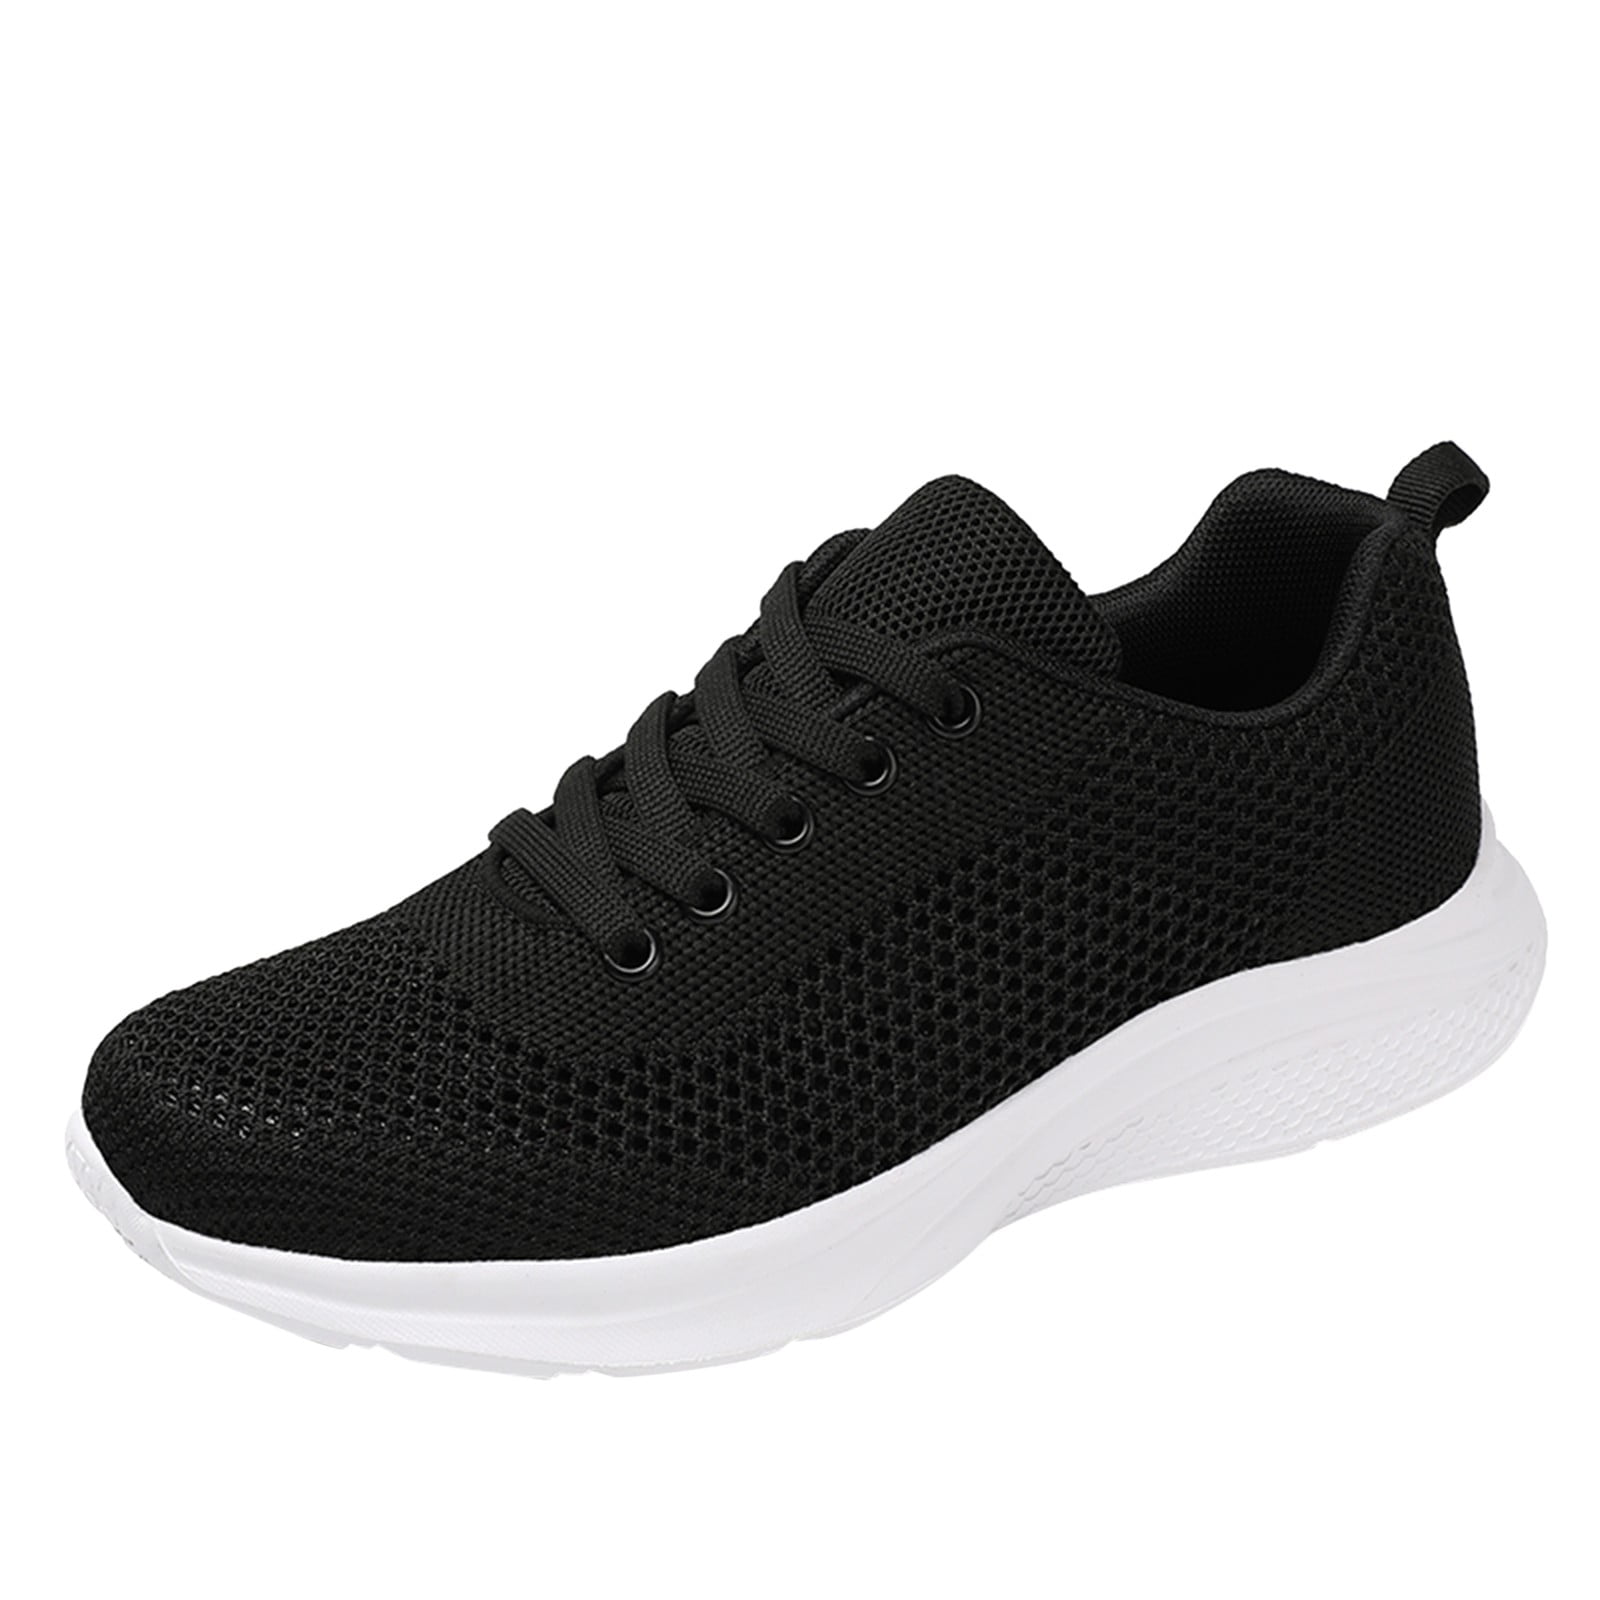 gvdentm Sneakers For Women Running Shoes Leisure Women's Lace Up Soft ...